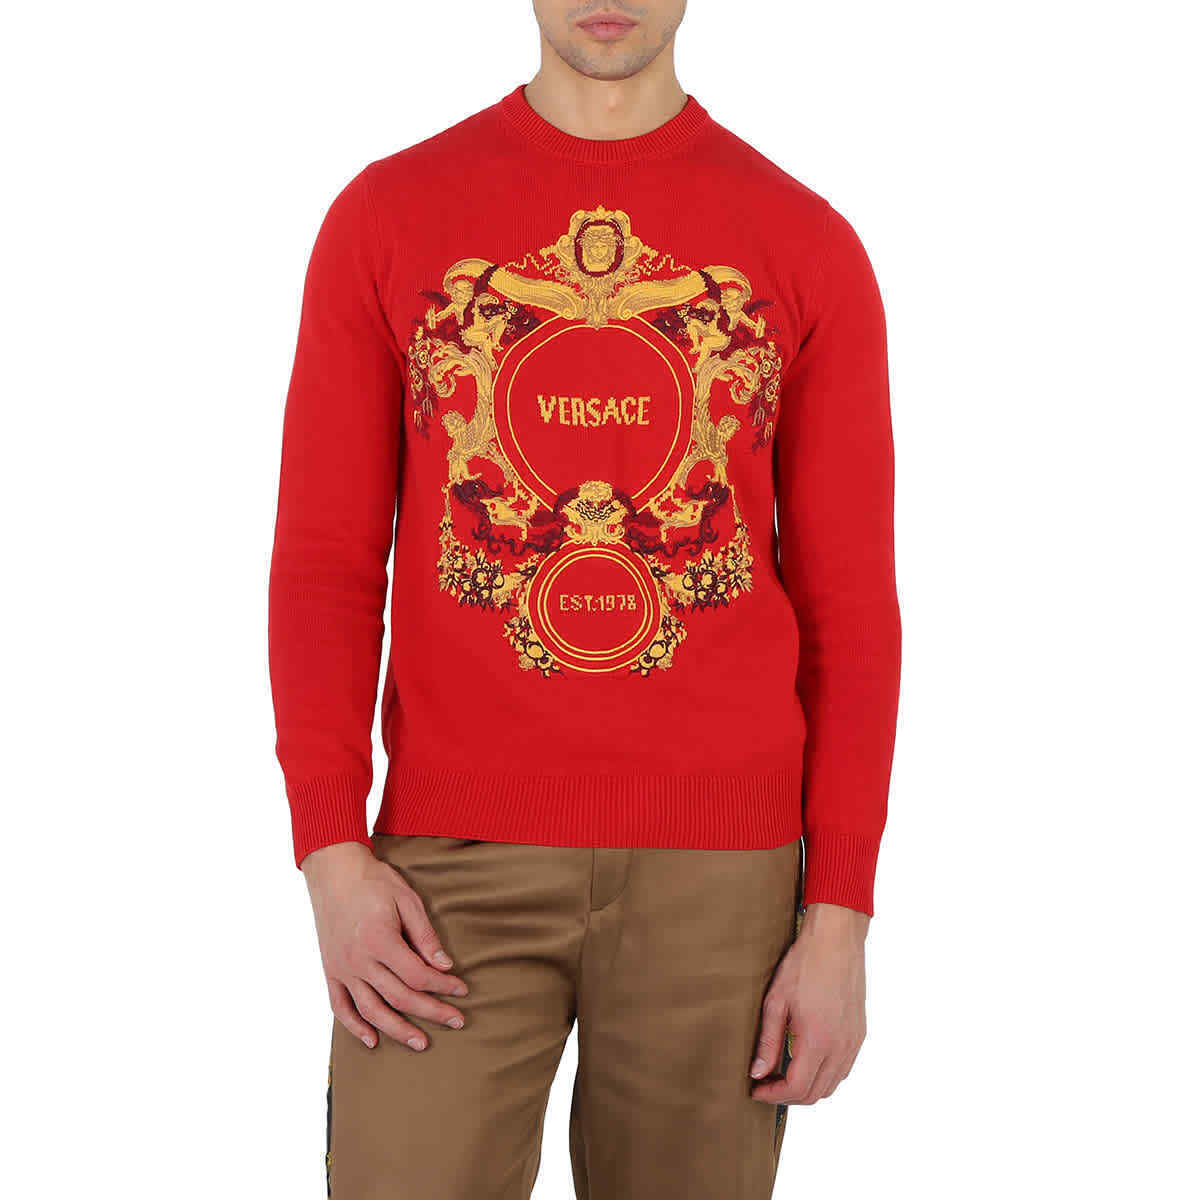 Versace Red Intarsia Knit Jacqurd Sweater, Brand Size 48 (US Size 